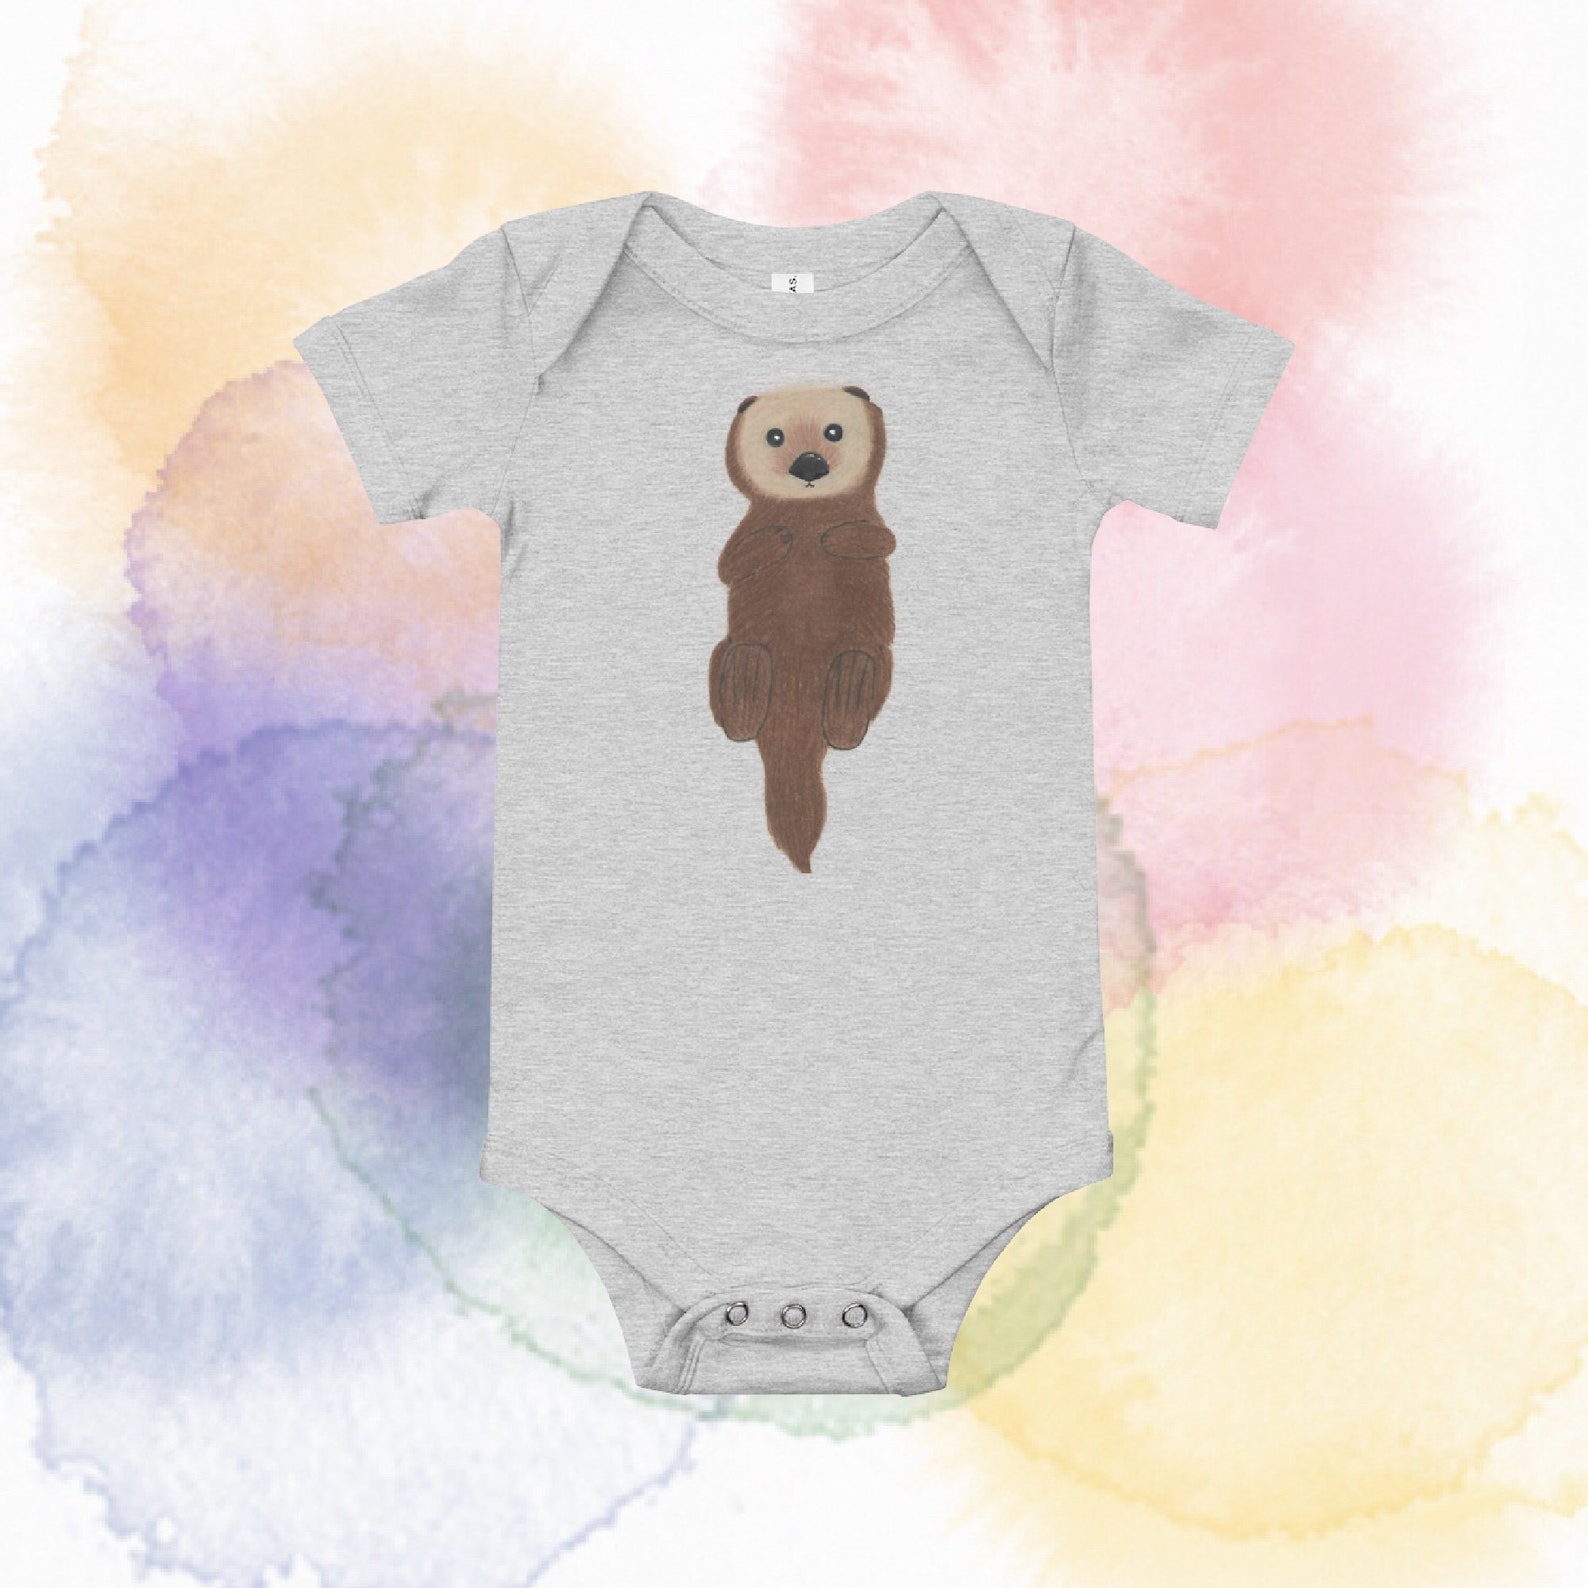 The Wee Otter Baby Onesie | Etsy